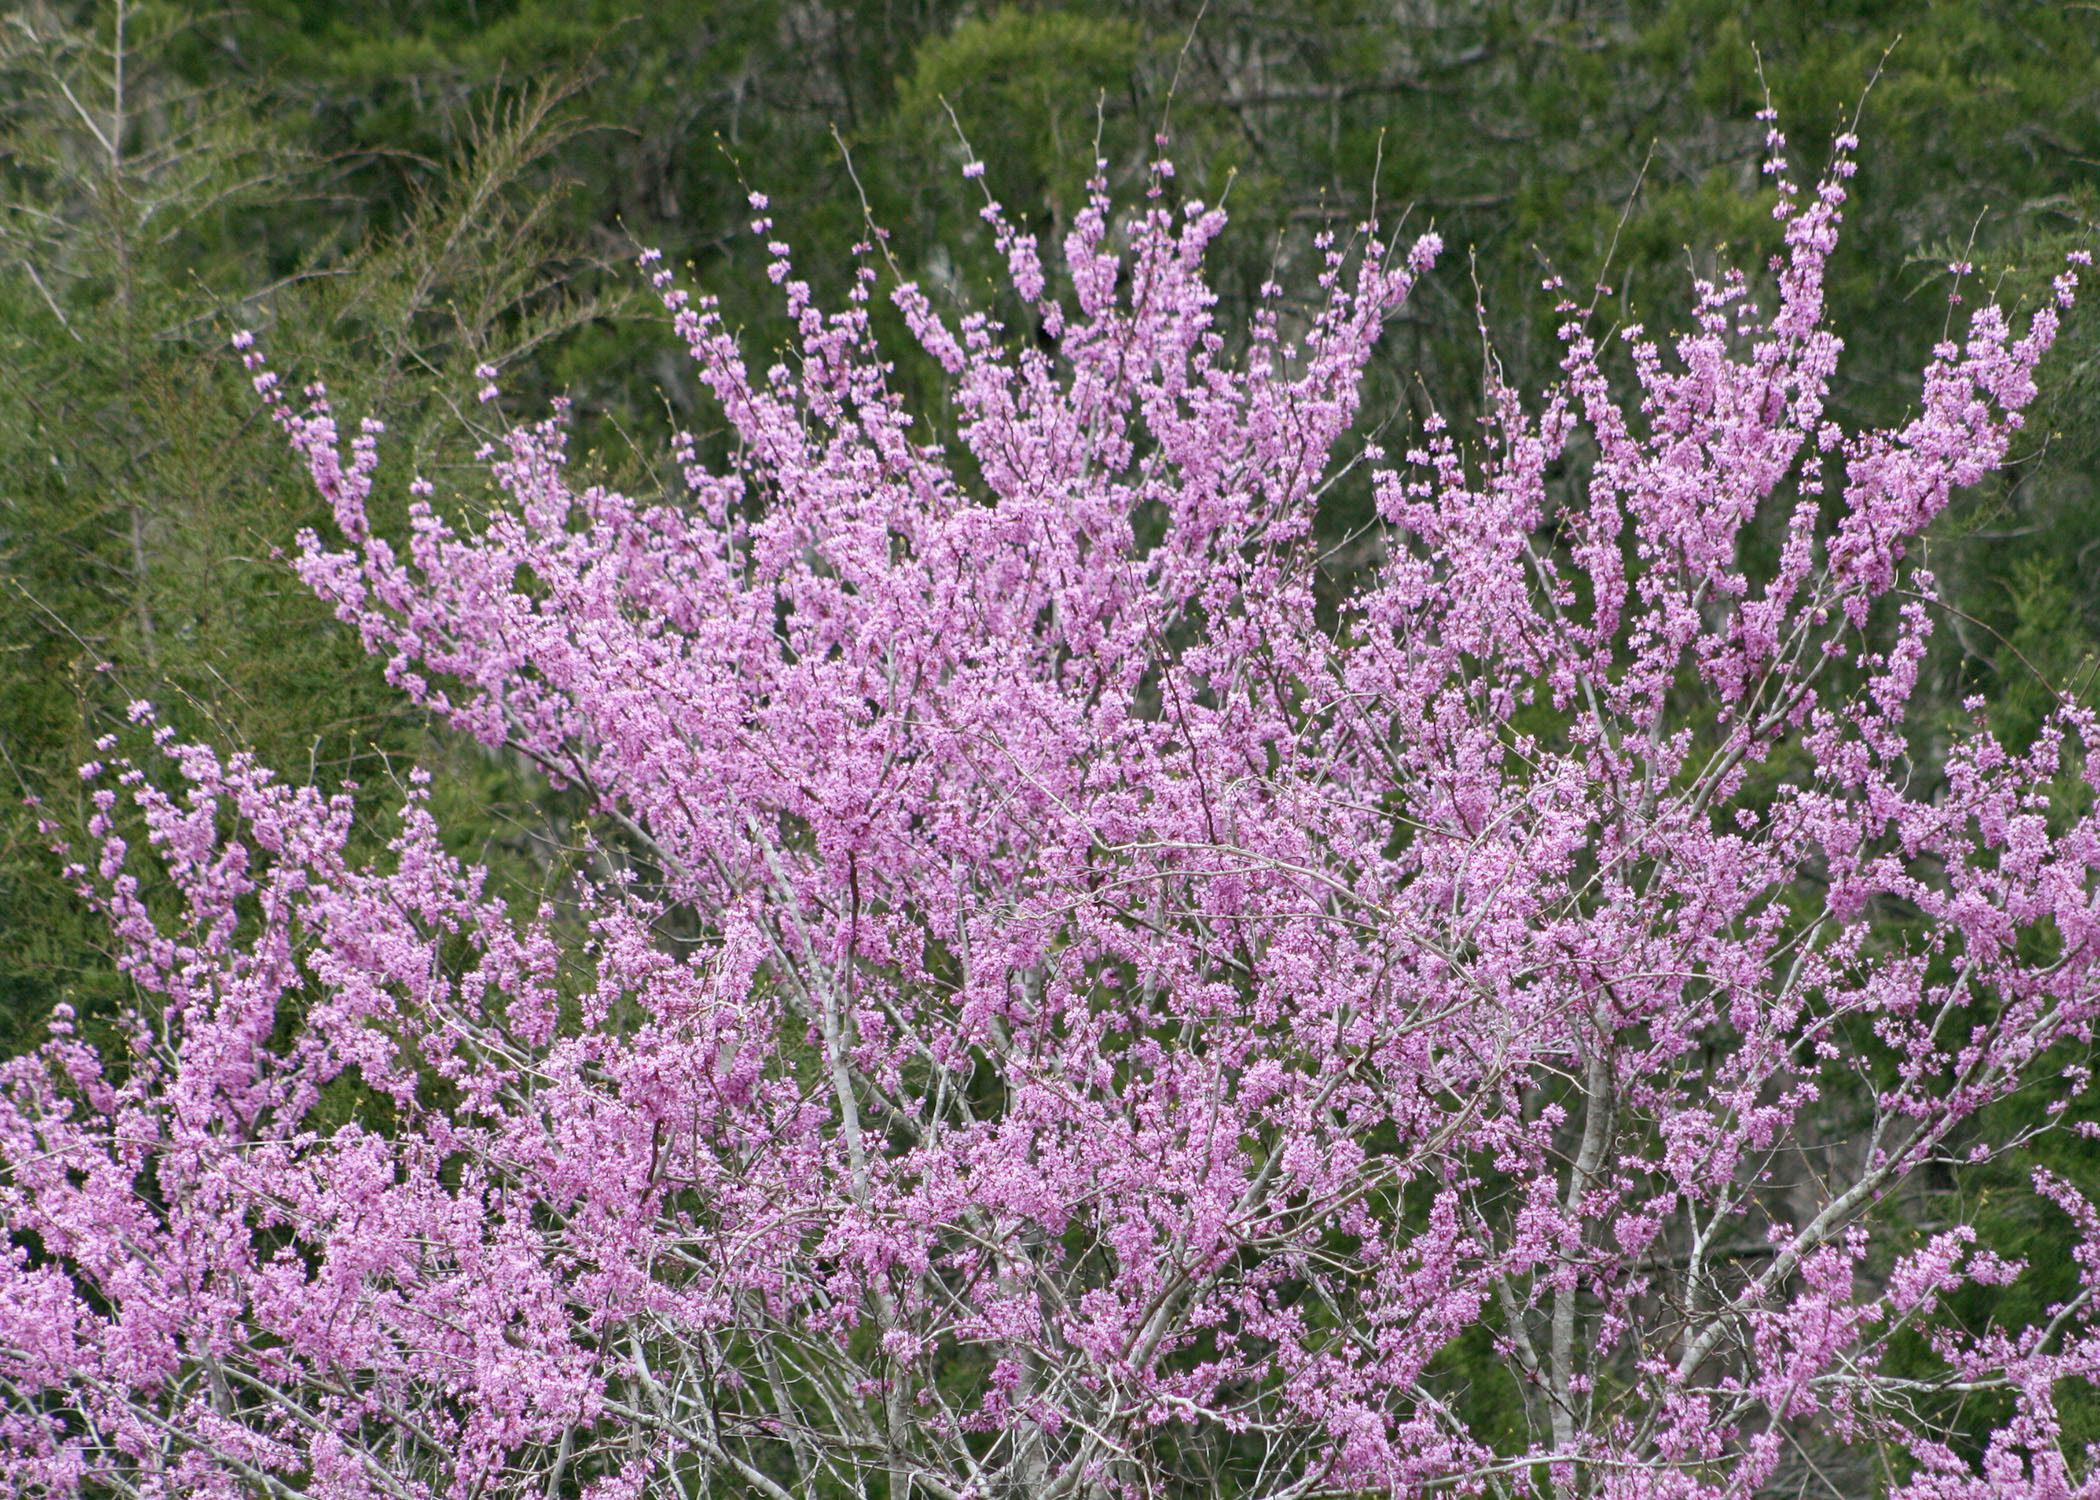 Eastern Redbud Tree with pink flowers.